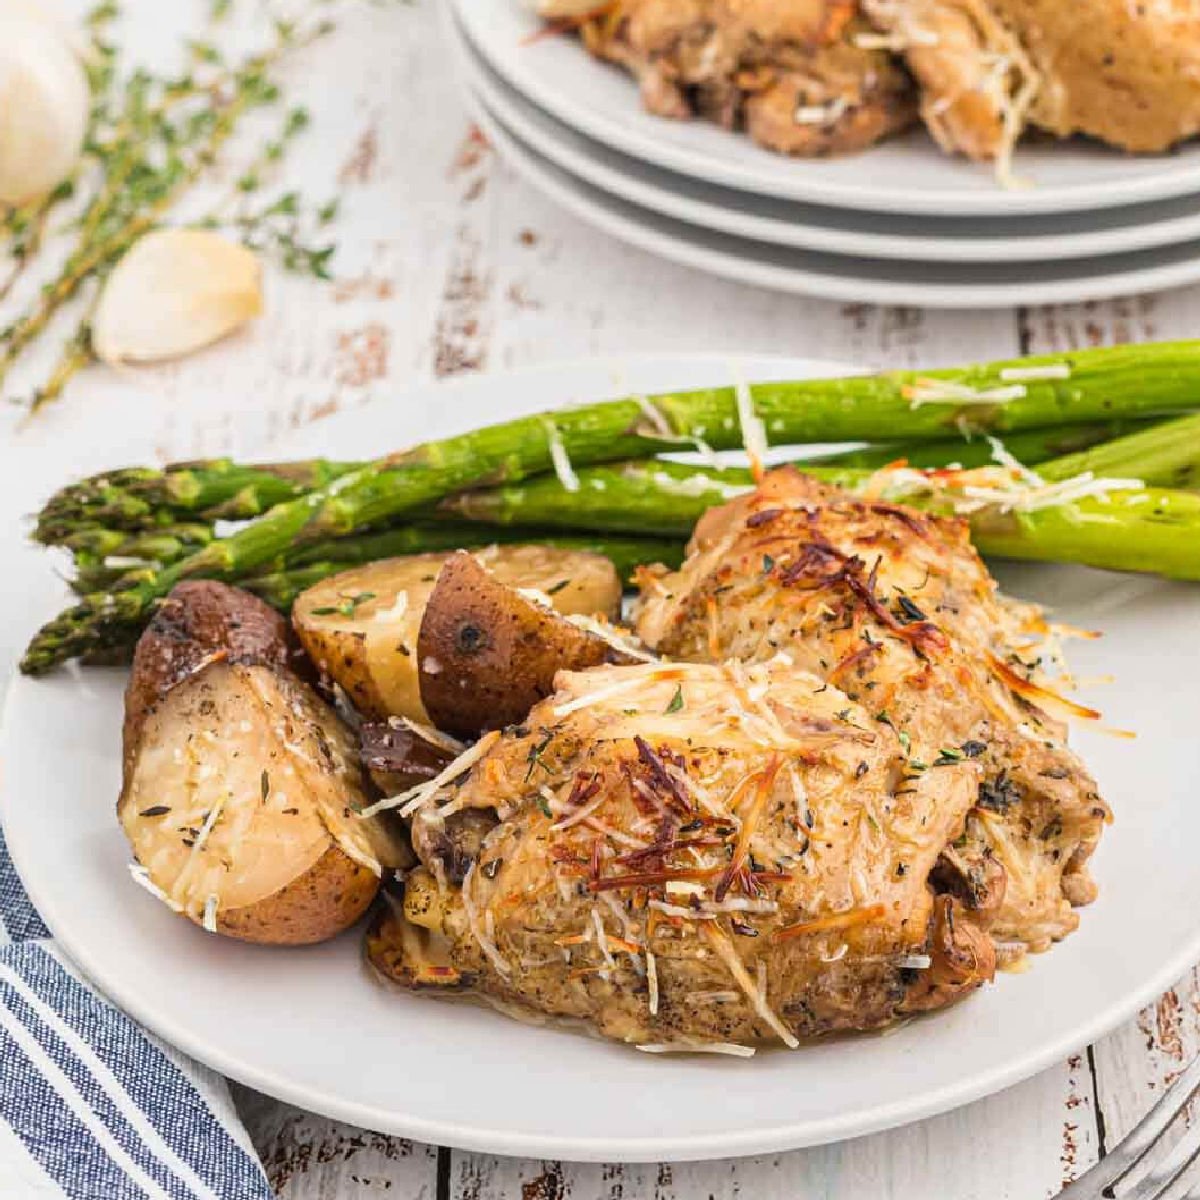 Chicken thighs, asparagus, potatoes on a white plate